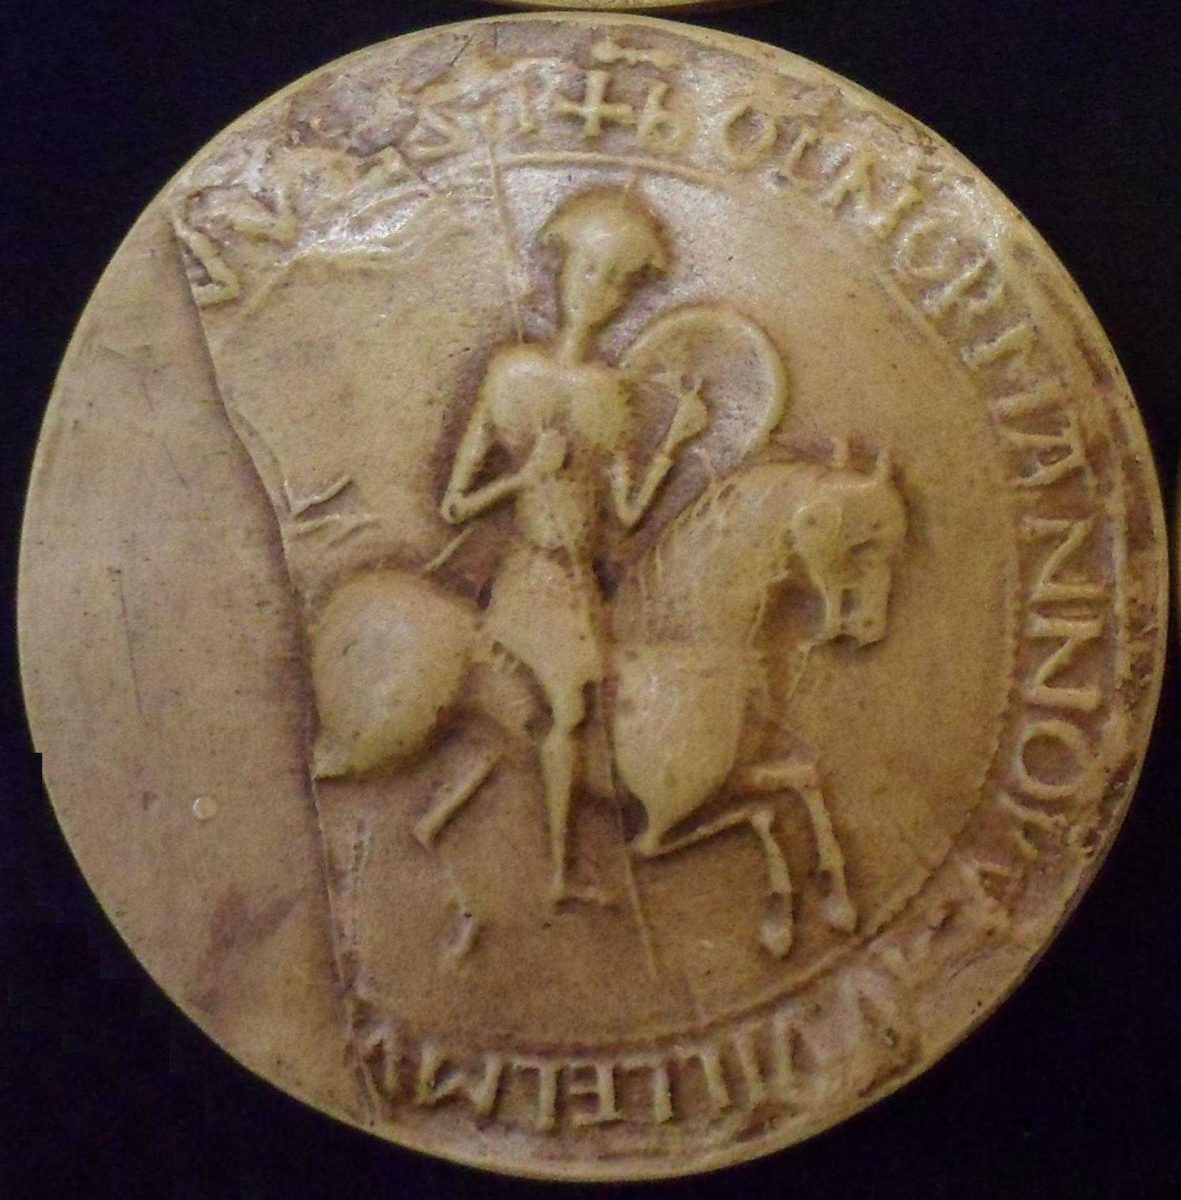 Molding the obverse of the seal of William the Conqueror